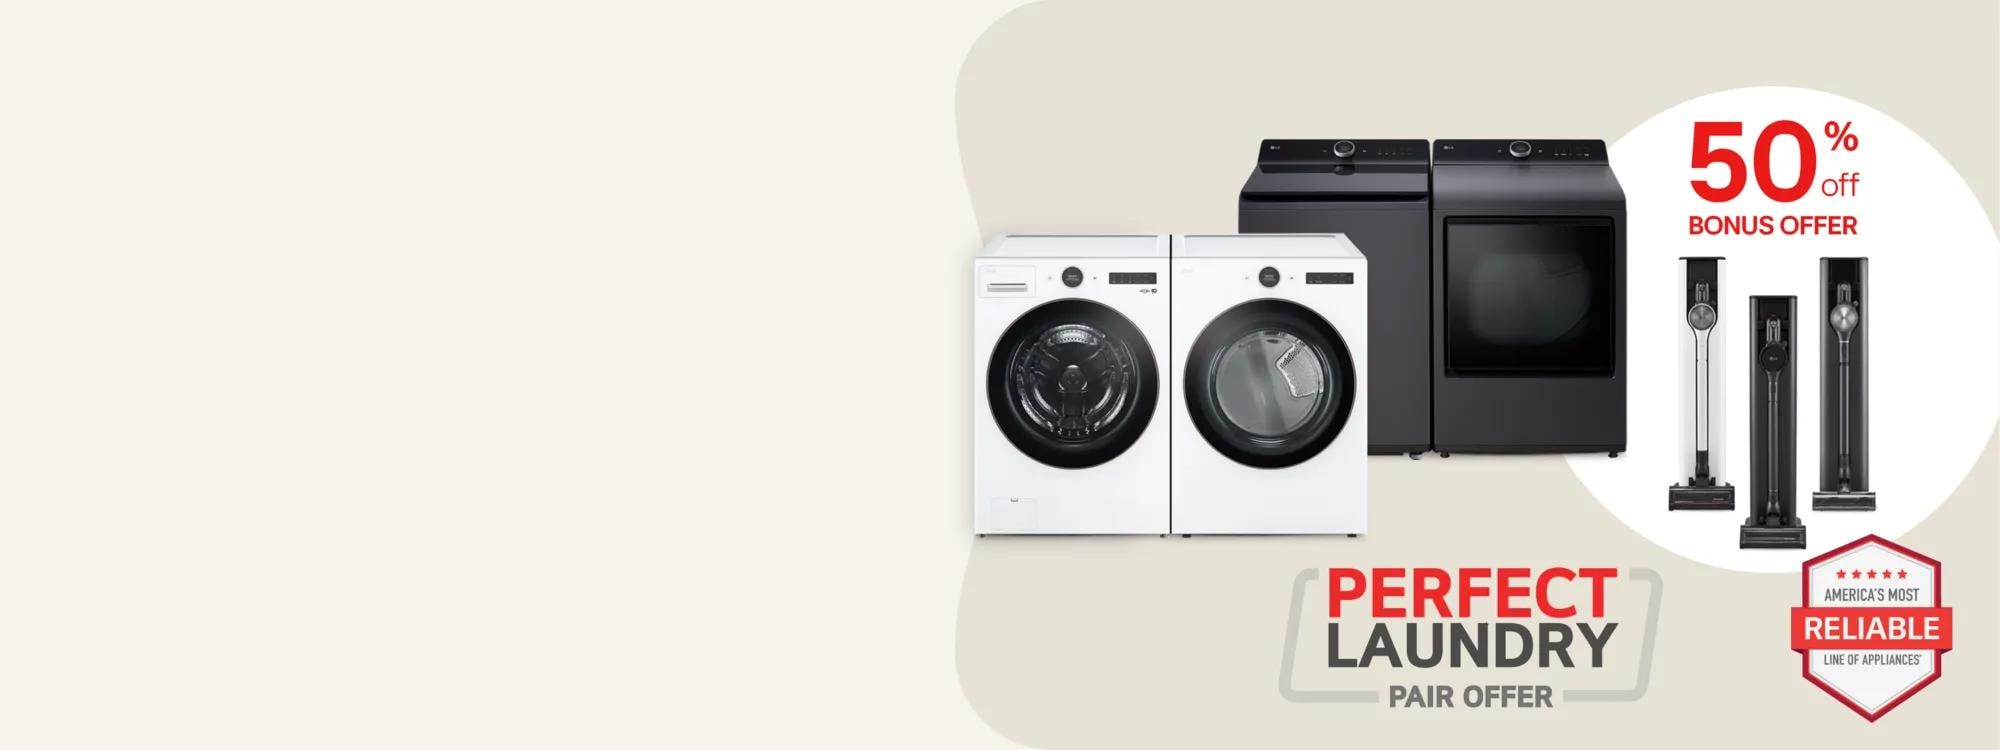 Get $100 off select laundry pair + 50% off vacuums